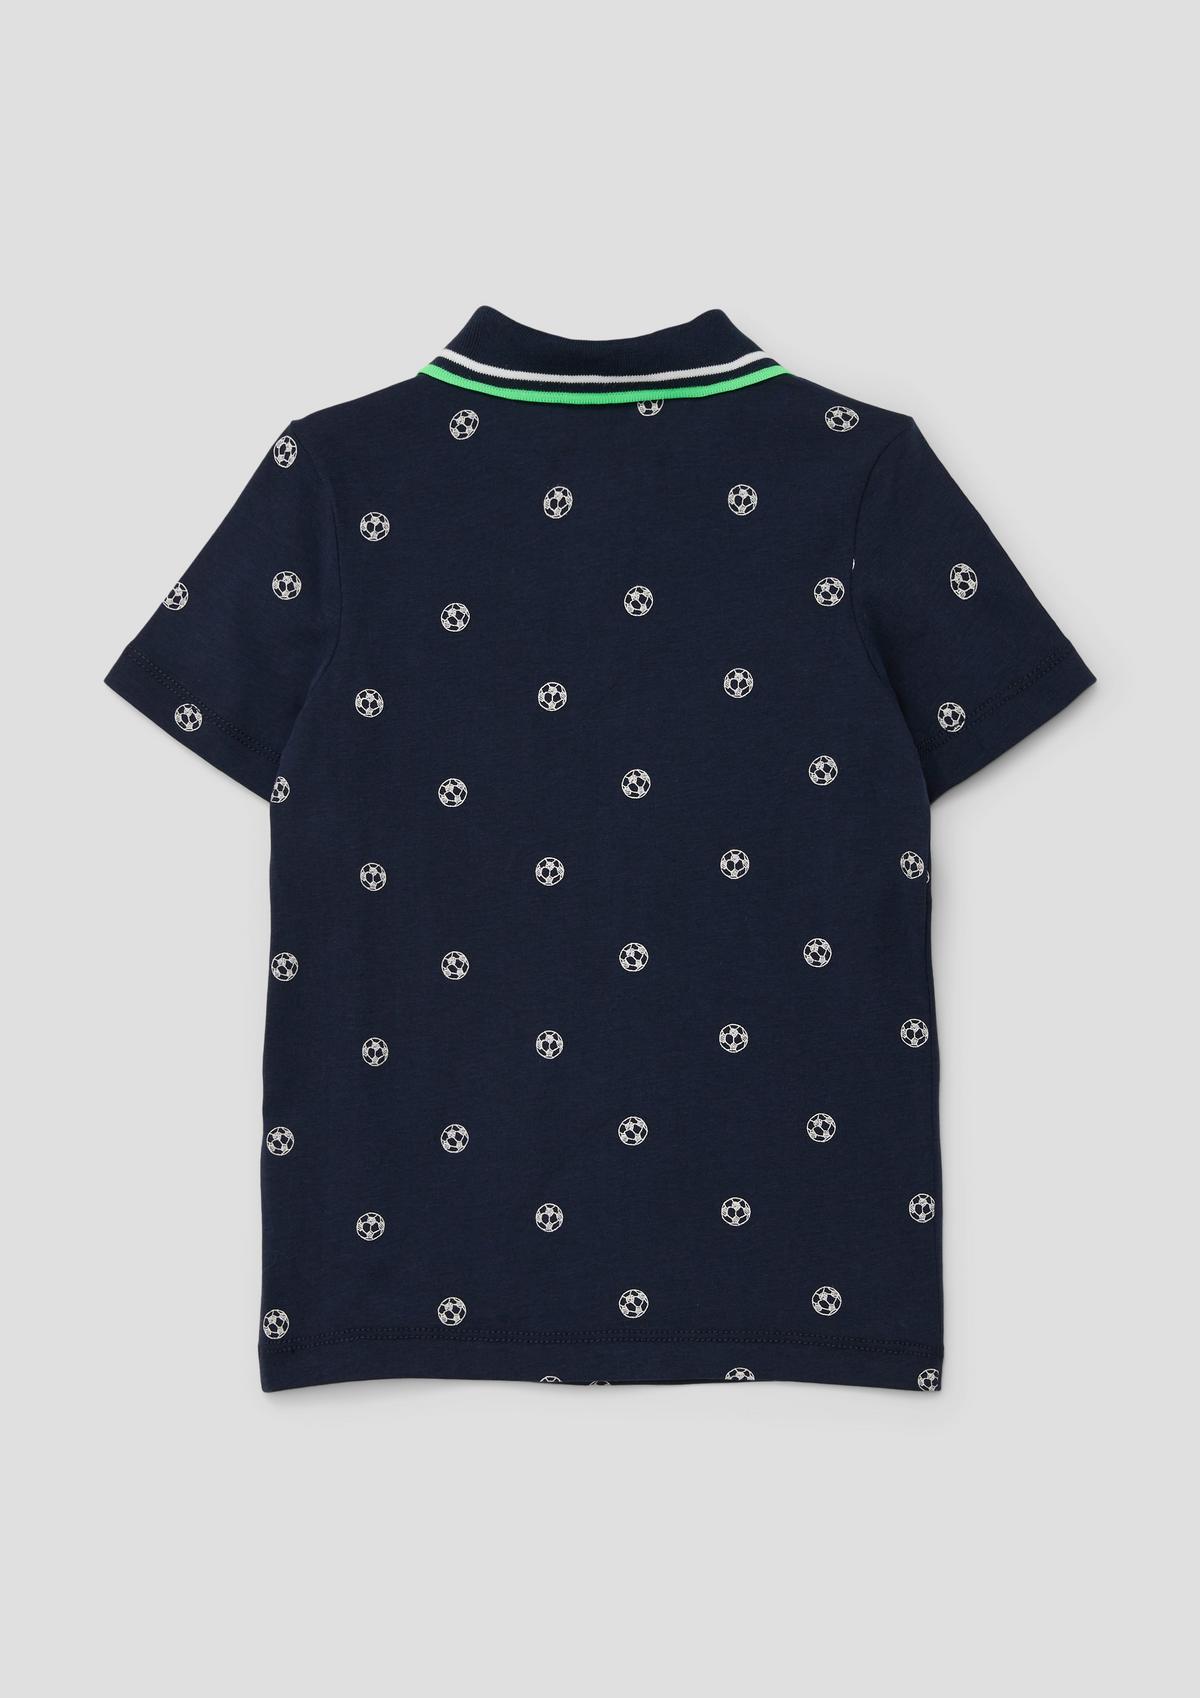 s.Oliver Poloshirt mit All-over-Muster